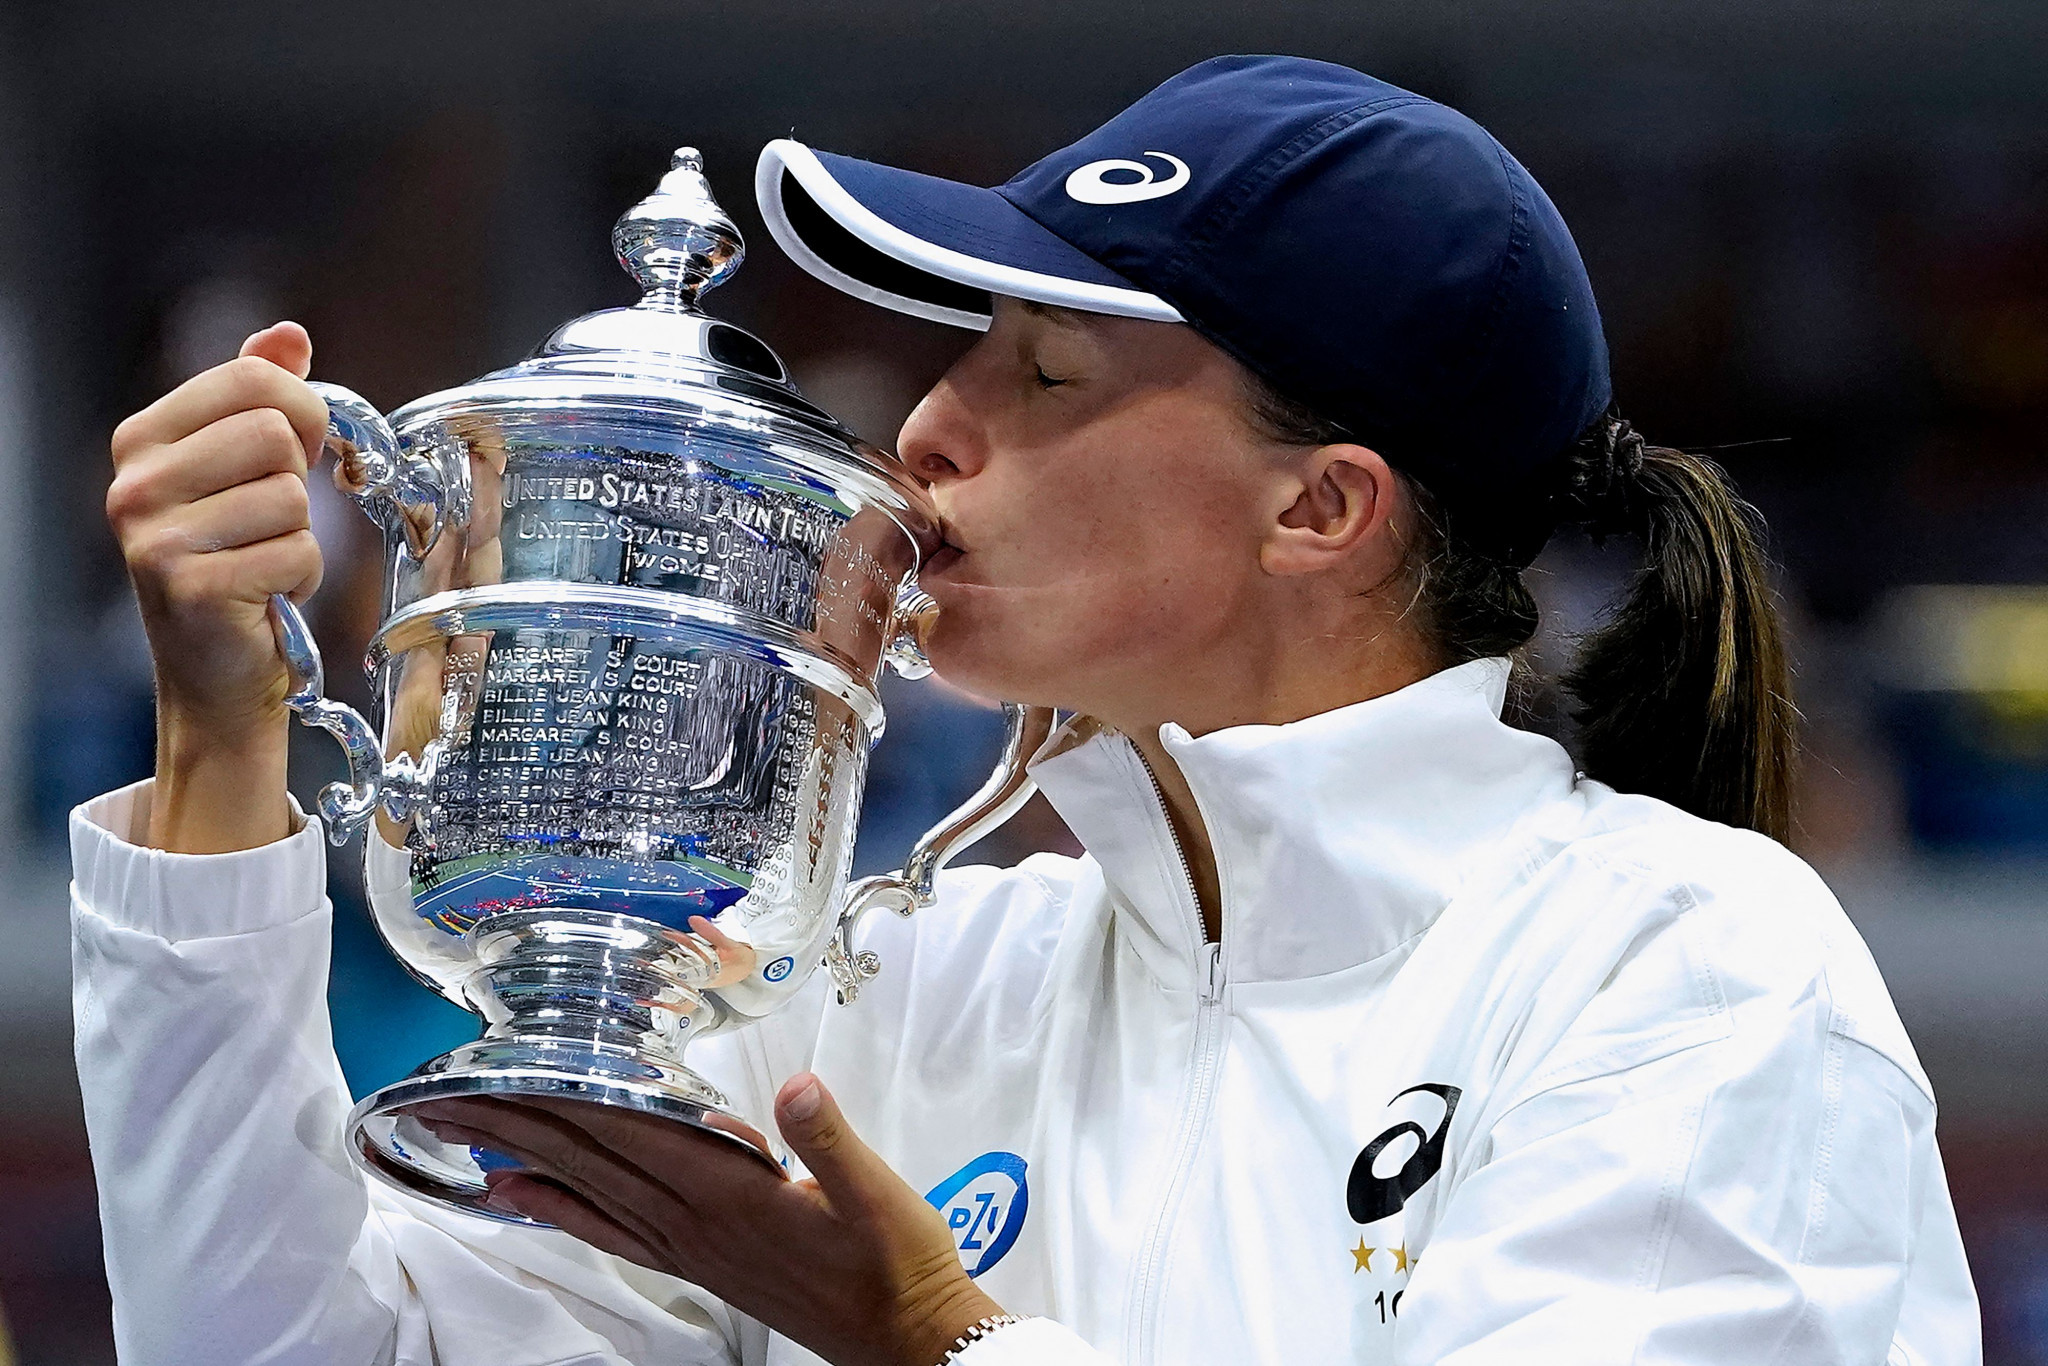 Iga Świątek beat Ons Jabeur of Tunisia 6-2, 7-6 to win the women's singles US Open trophy ©Getty Images